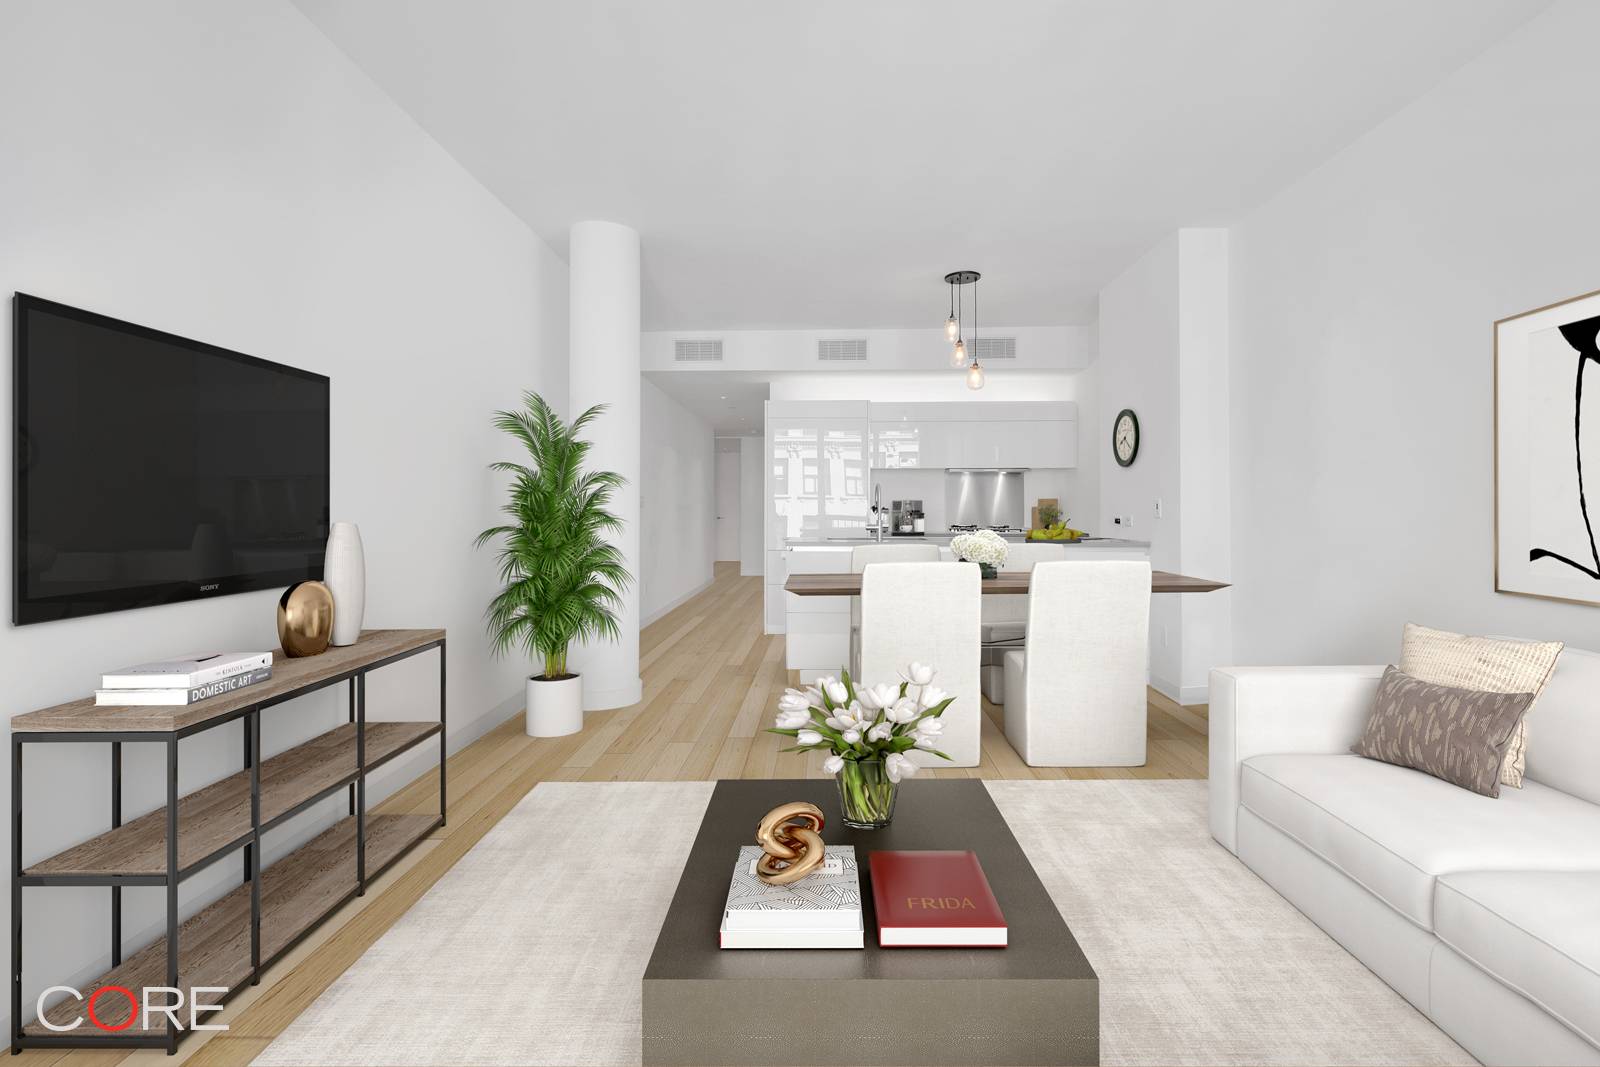 Available for June 1st occupancy Live in the center of NoMad, Manhattan's hottest neighborhood, which boasts a bustling restaurant and hotel scene set against the lush, green landscape of Madison ...